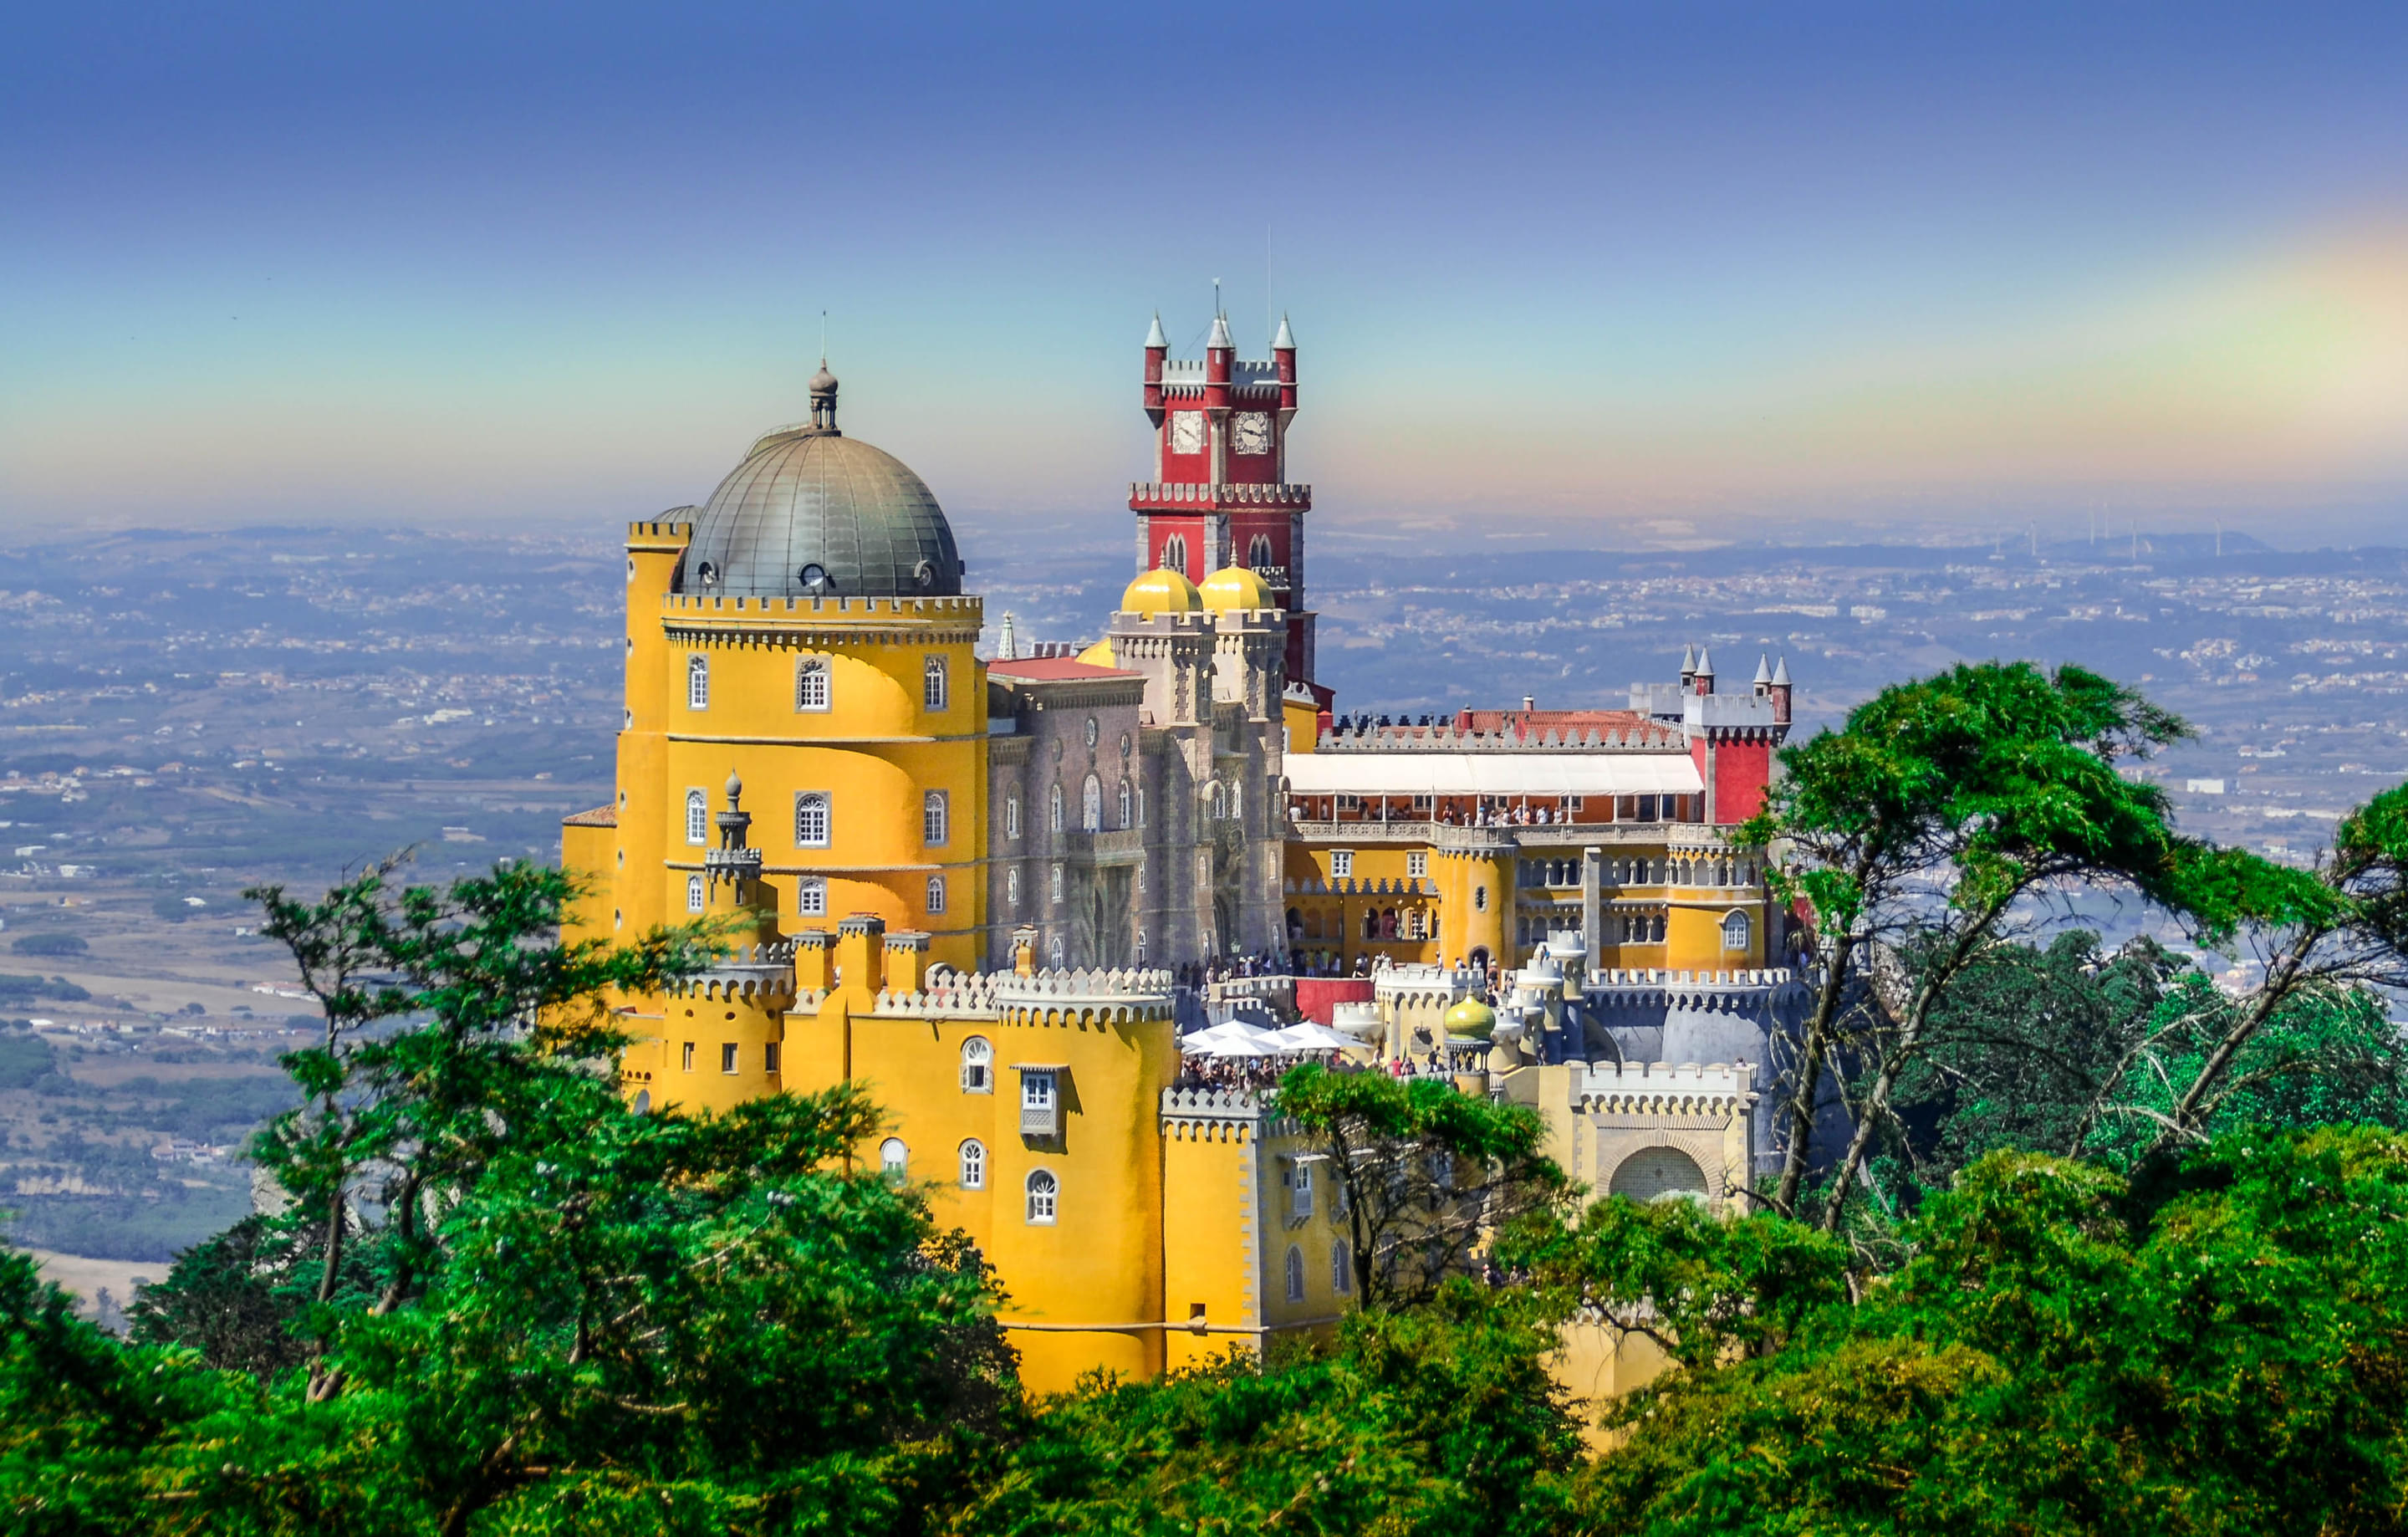 Pena Palace Overview